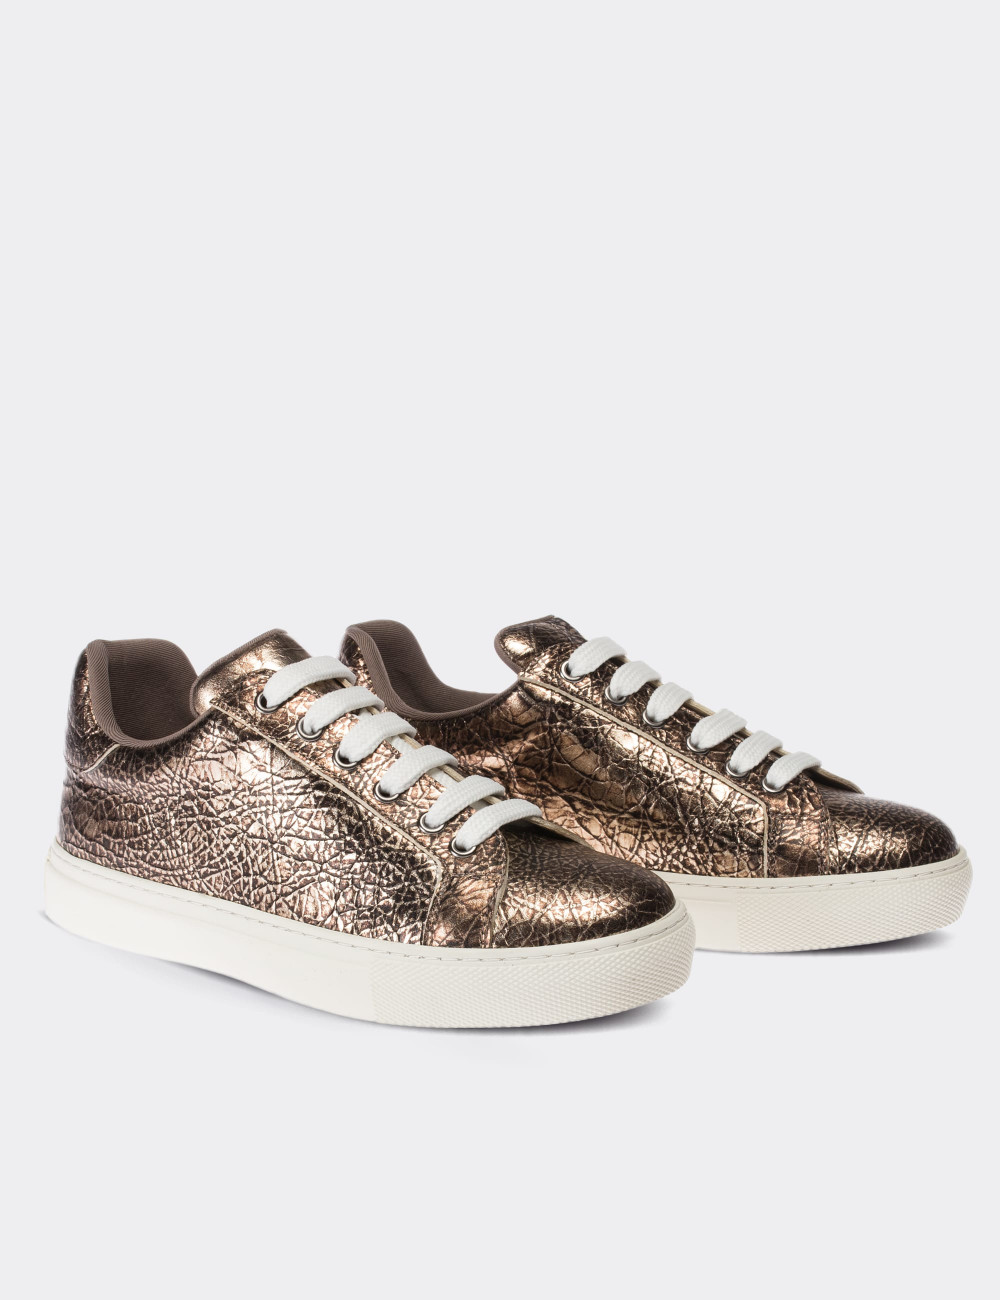 Copper  Leather  Sneakers - 01698ZBKRC01